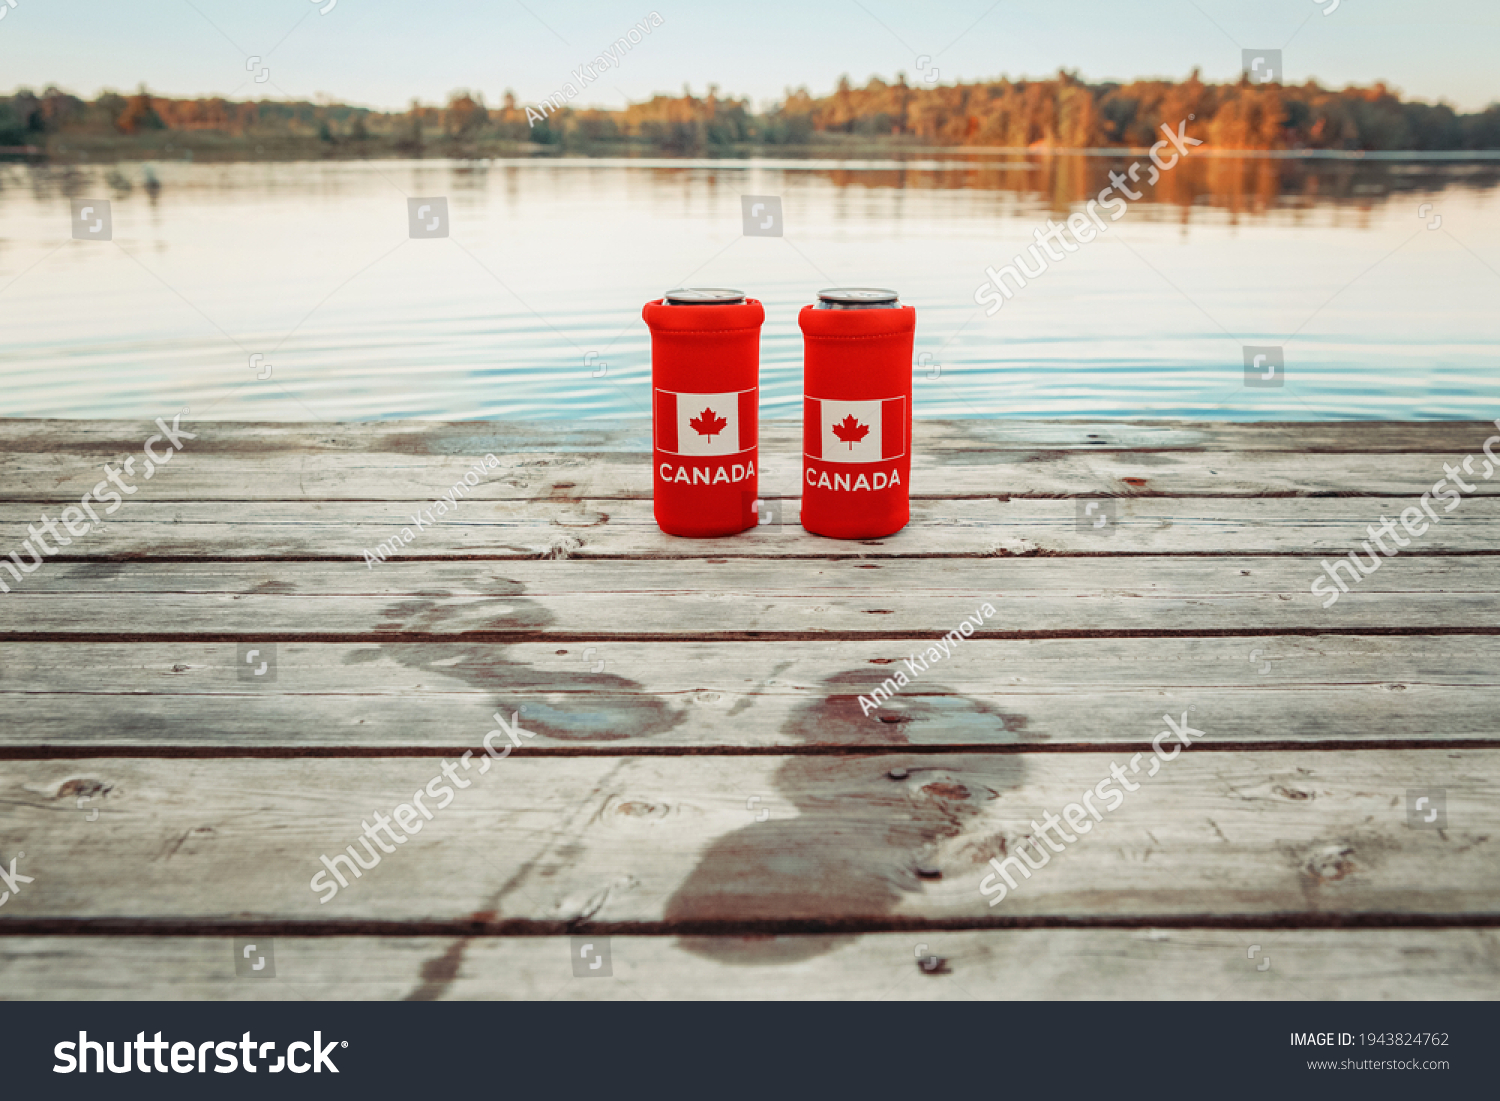 Two cans of beer in red cozy beer can coolers with Canadian flag standing on wooden pier by lake outdoors. Wet footprints on wooden dock. Friends celebrating Canada Day national celebration by water.  #1943824762